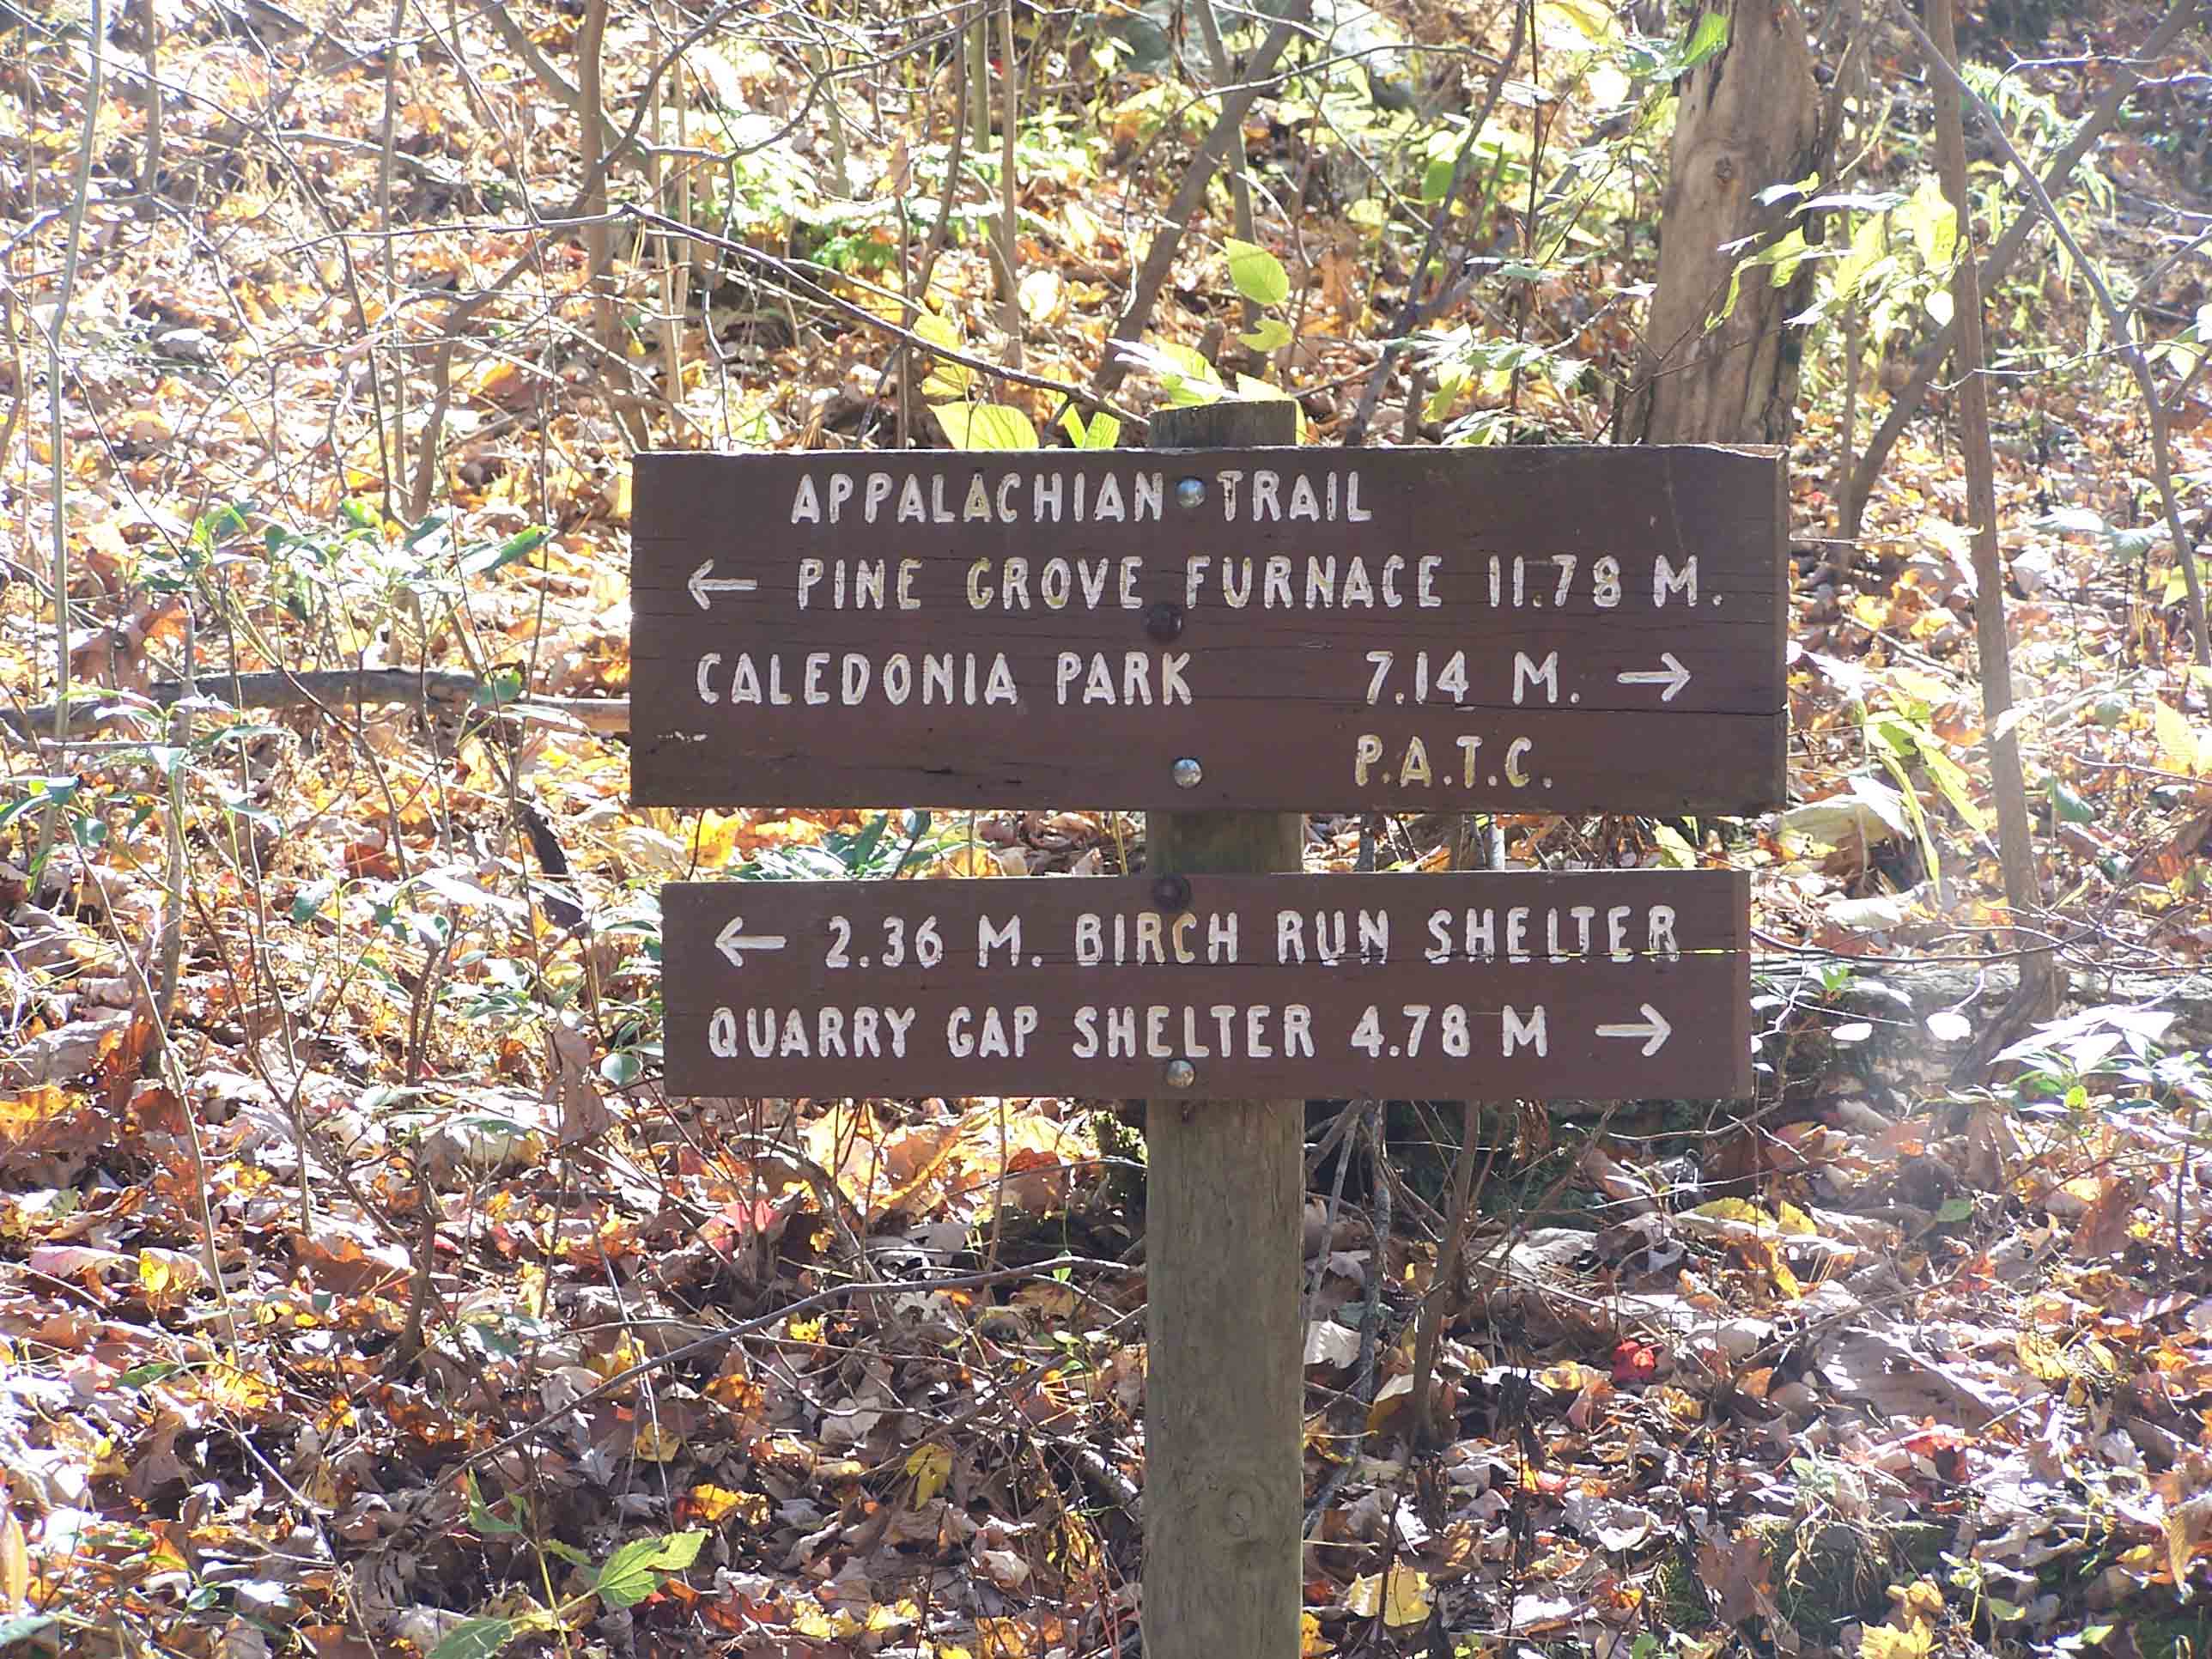 Sign at Milesburn Cabin mm 12.1. Courtesy at@rohland.org